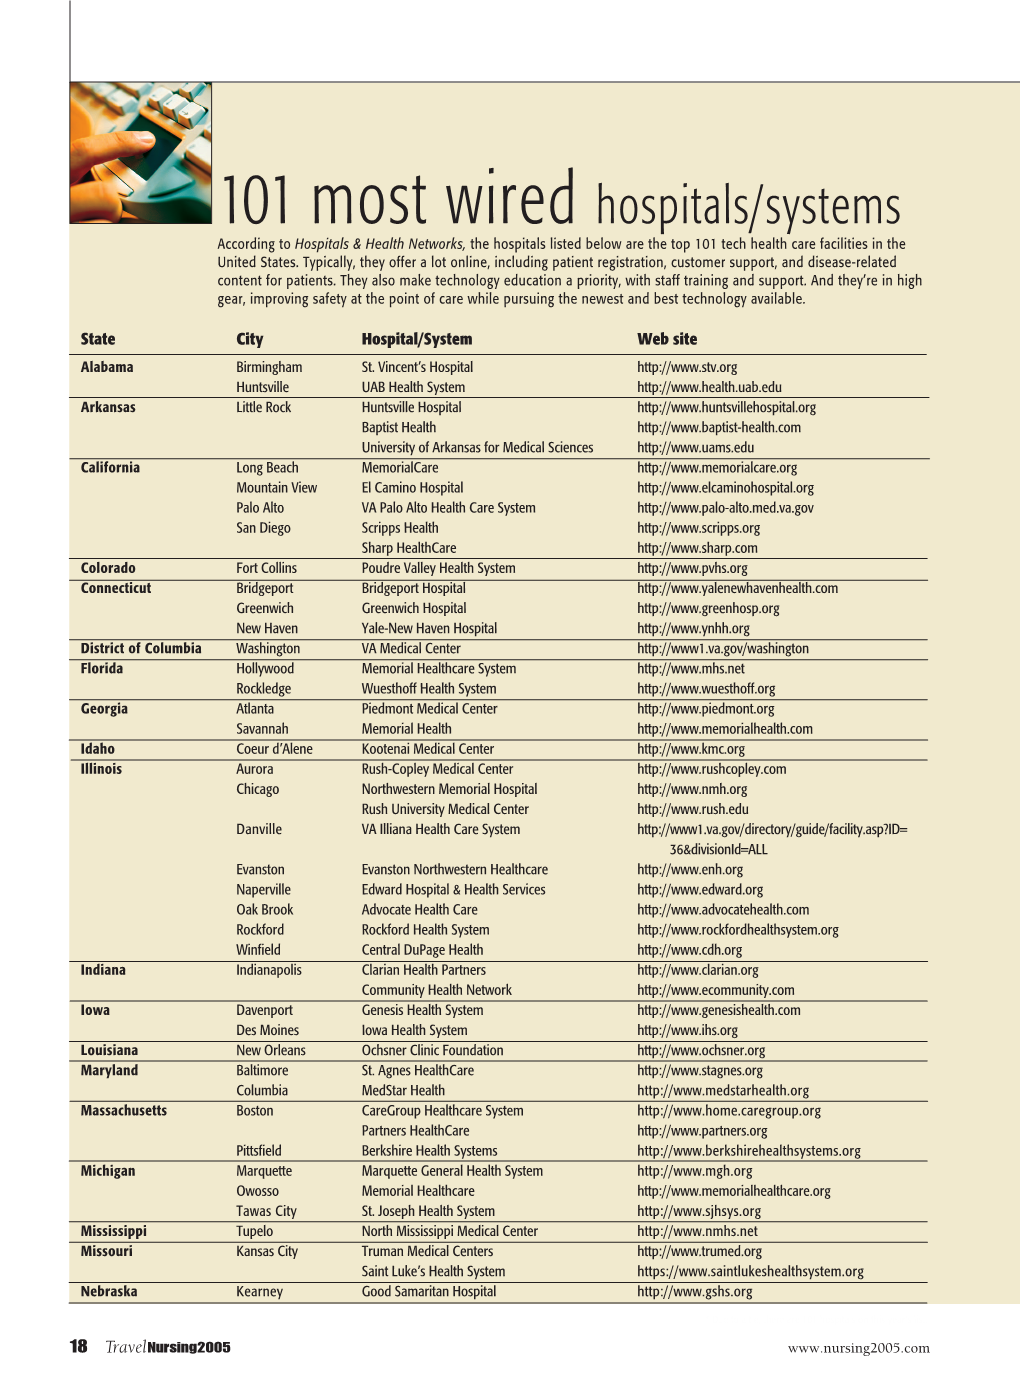 101 Most Wired Hospitals/Systems According to Hospitals & Health Networks, the Hospitals Listed Below Are the Top 101 Tech Health Care Facilities in the United States